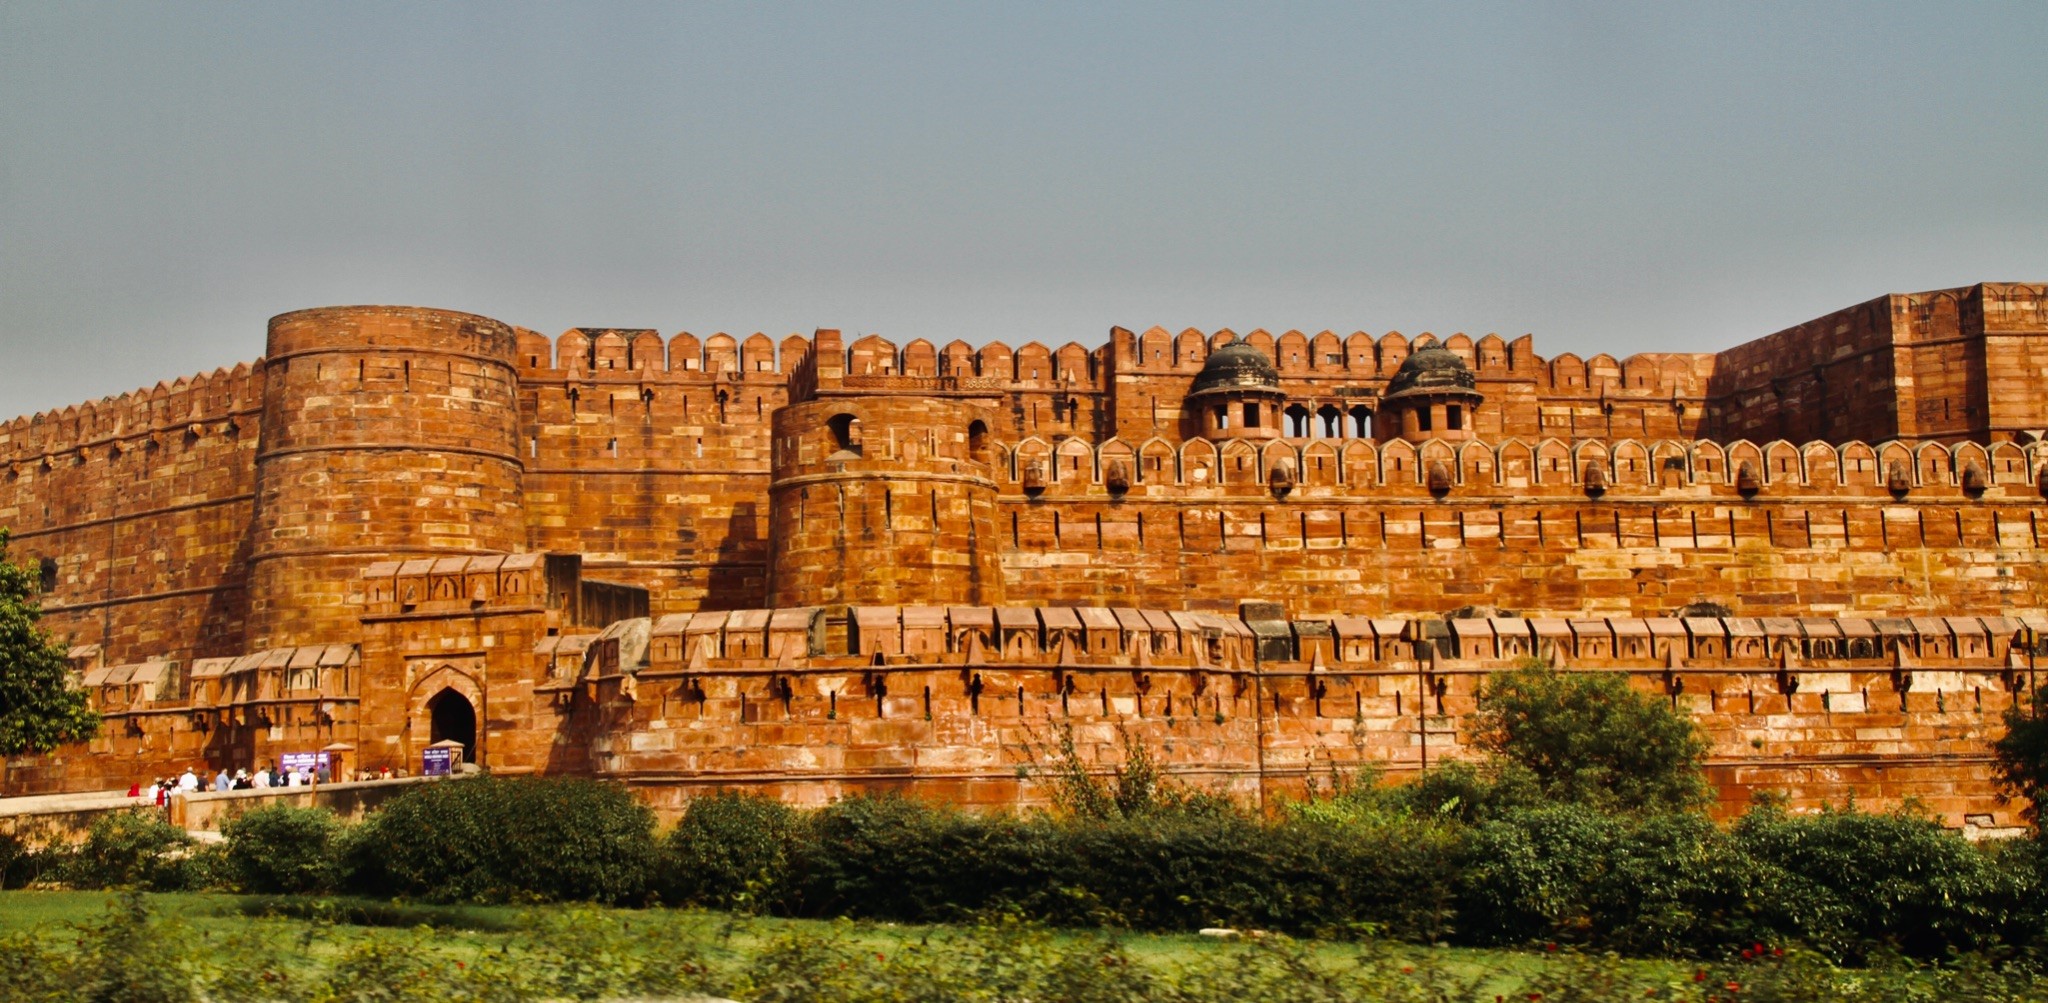 Ramparts of the Agra Fort. Image Source: Wikimedia Commons